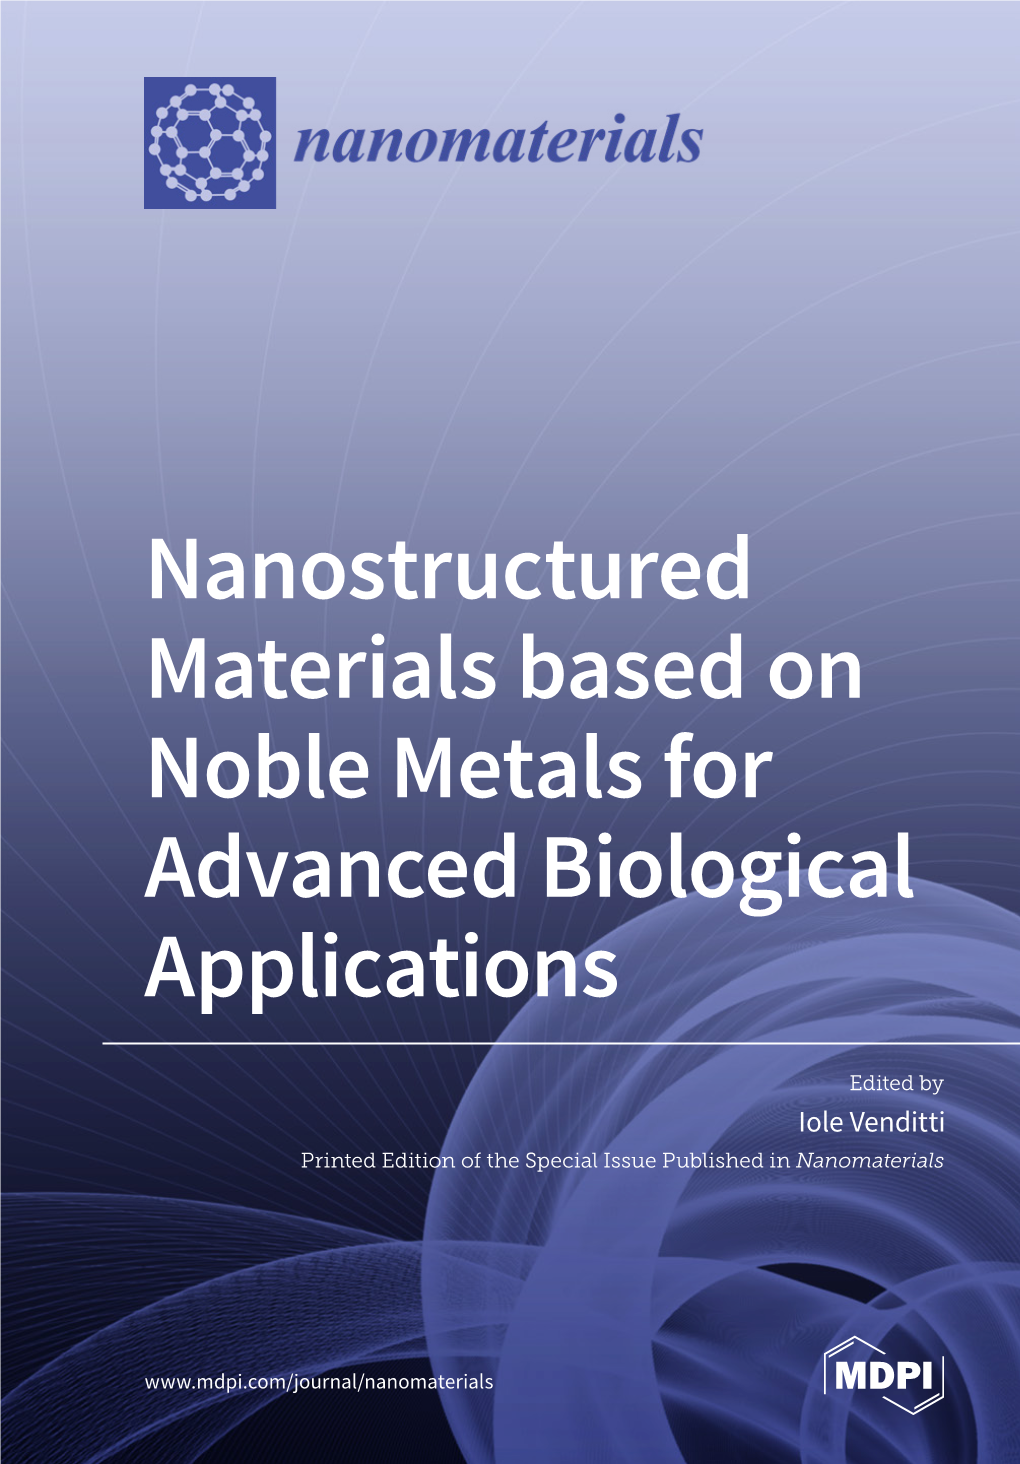 Nanostructured Materials Based on Noble Metals for Advanced Biological Applications